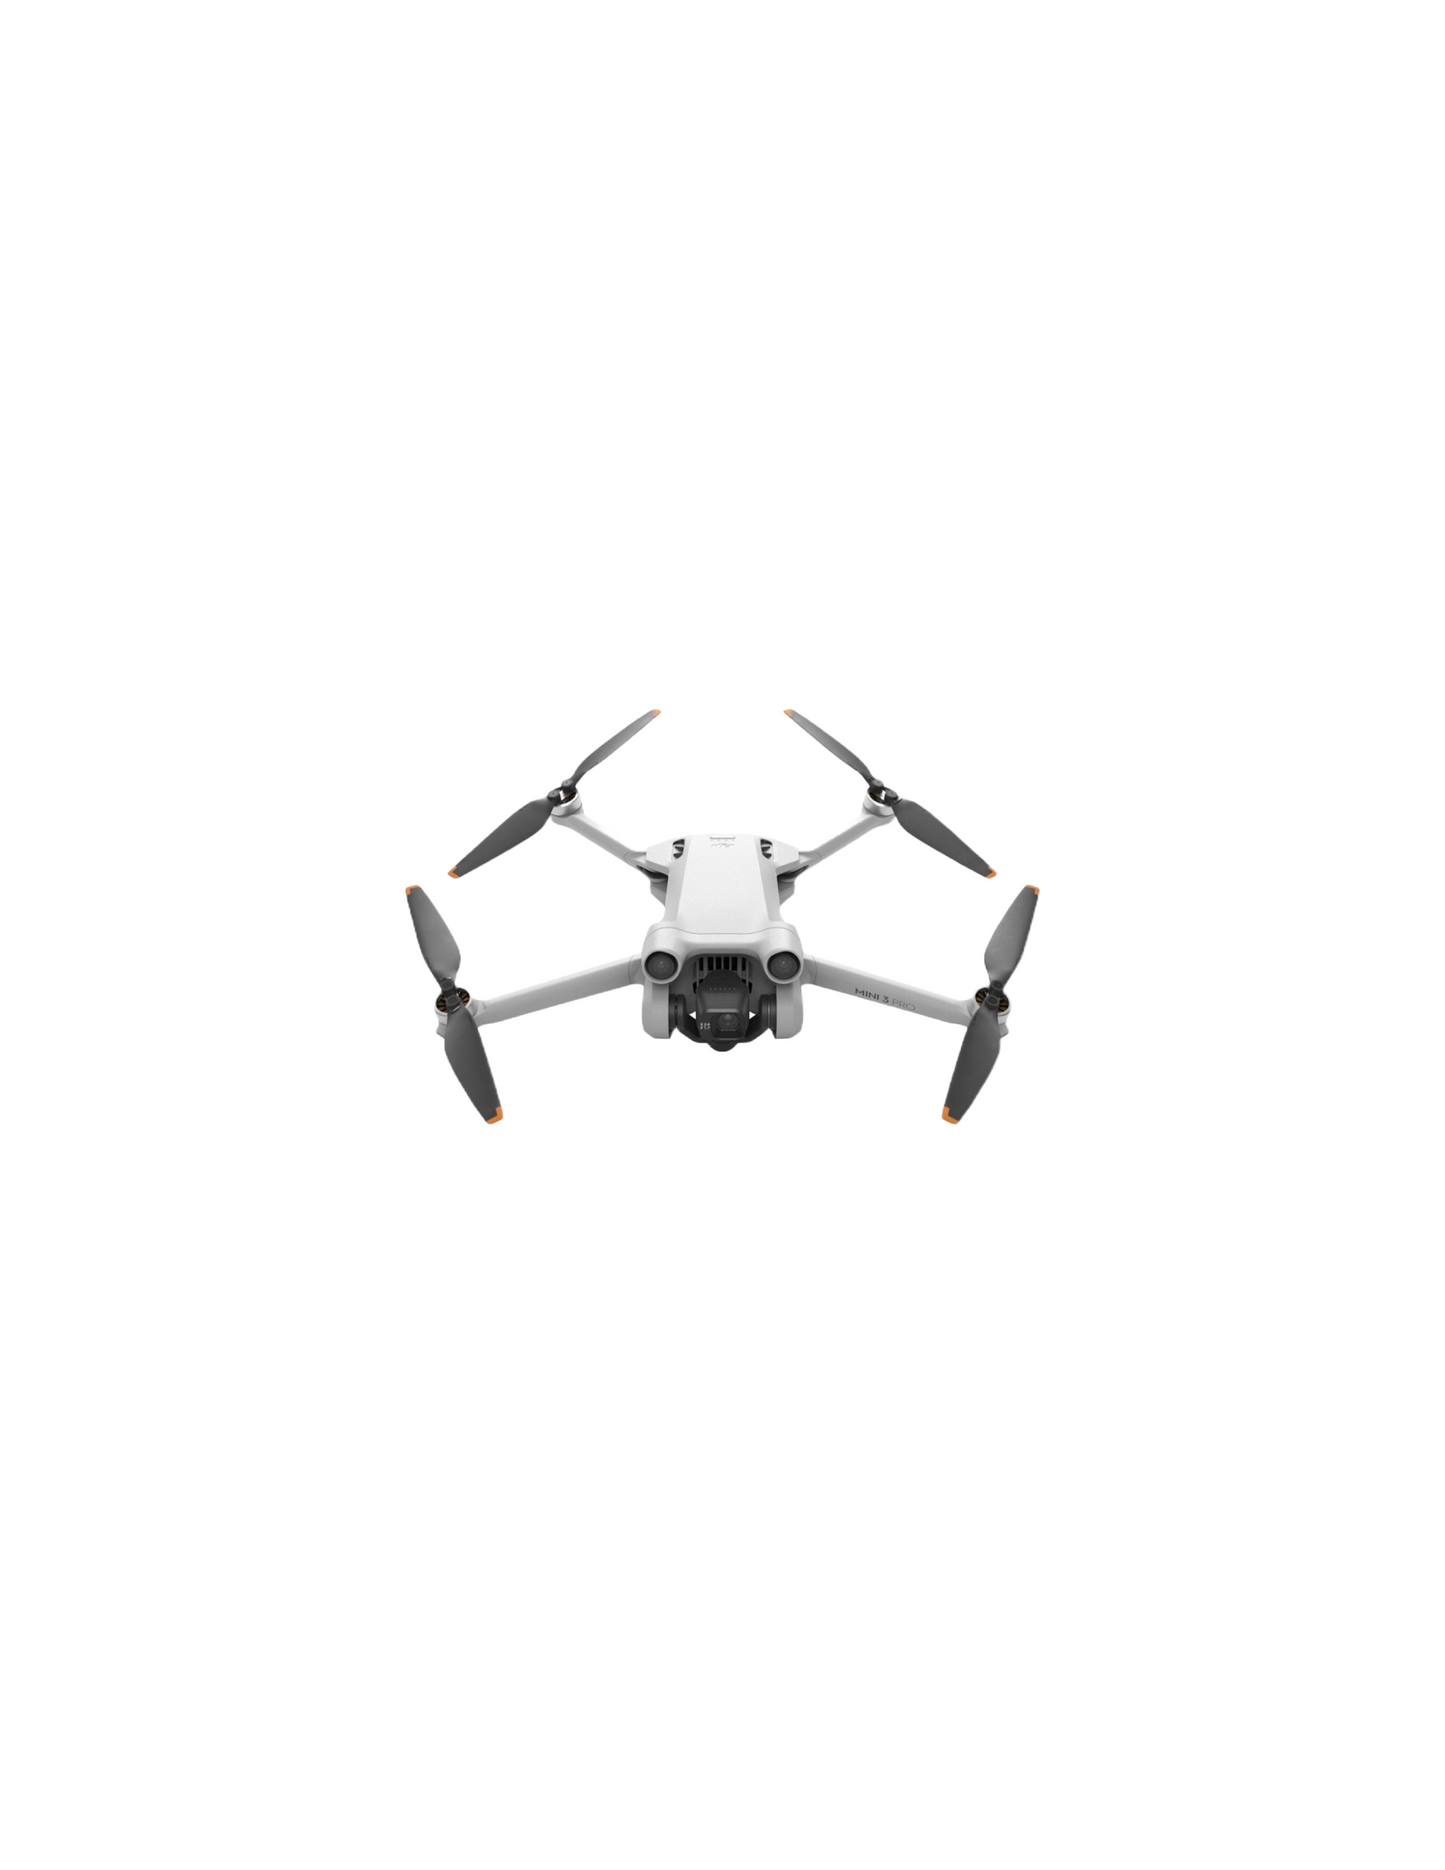 DJI - Mini 3 Pro and Remote Control with Built-in Screen